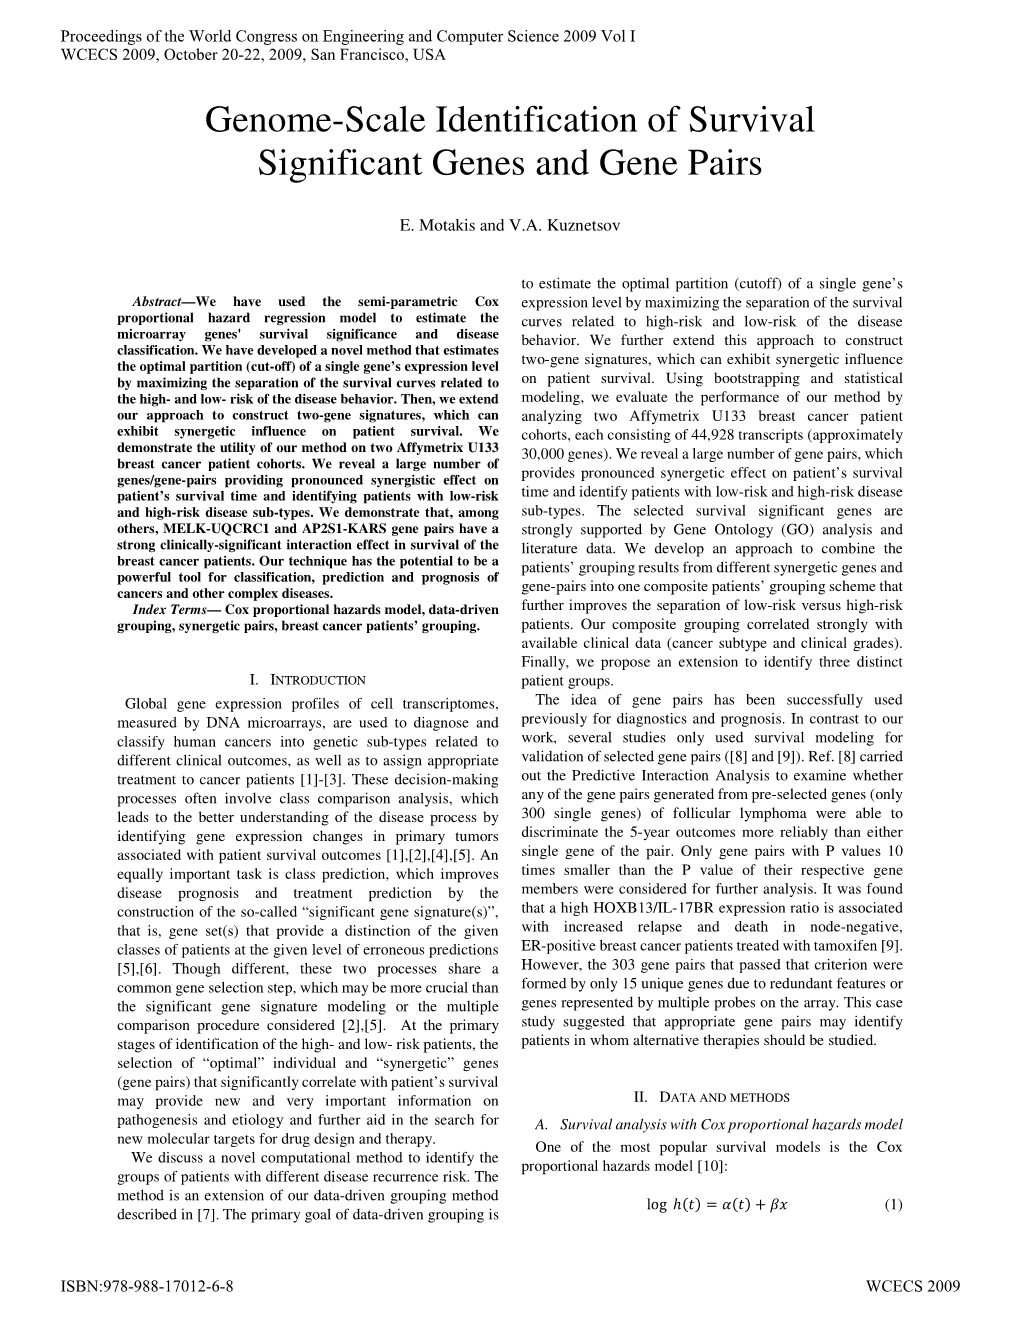 Genome-Scale Identification of Survival Significant Genes and Gene Pairs